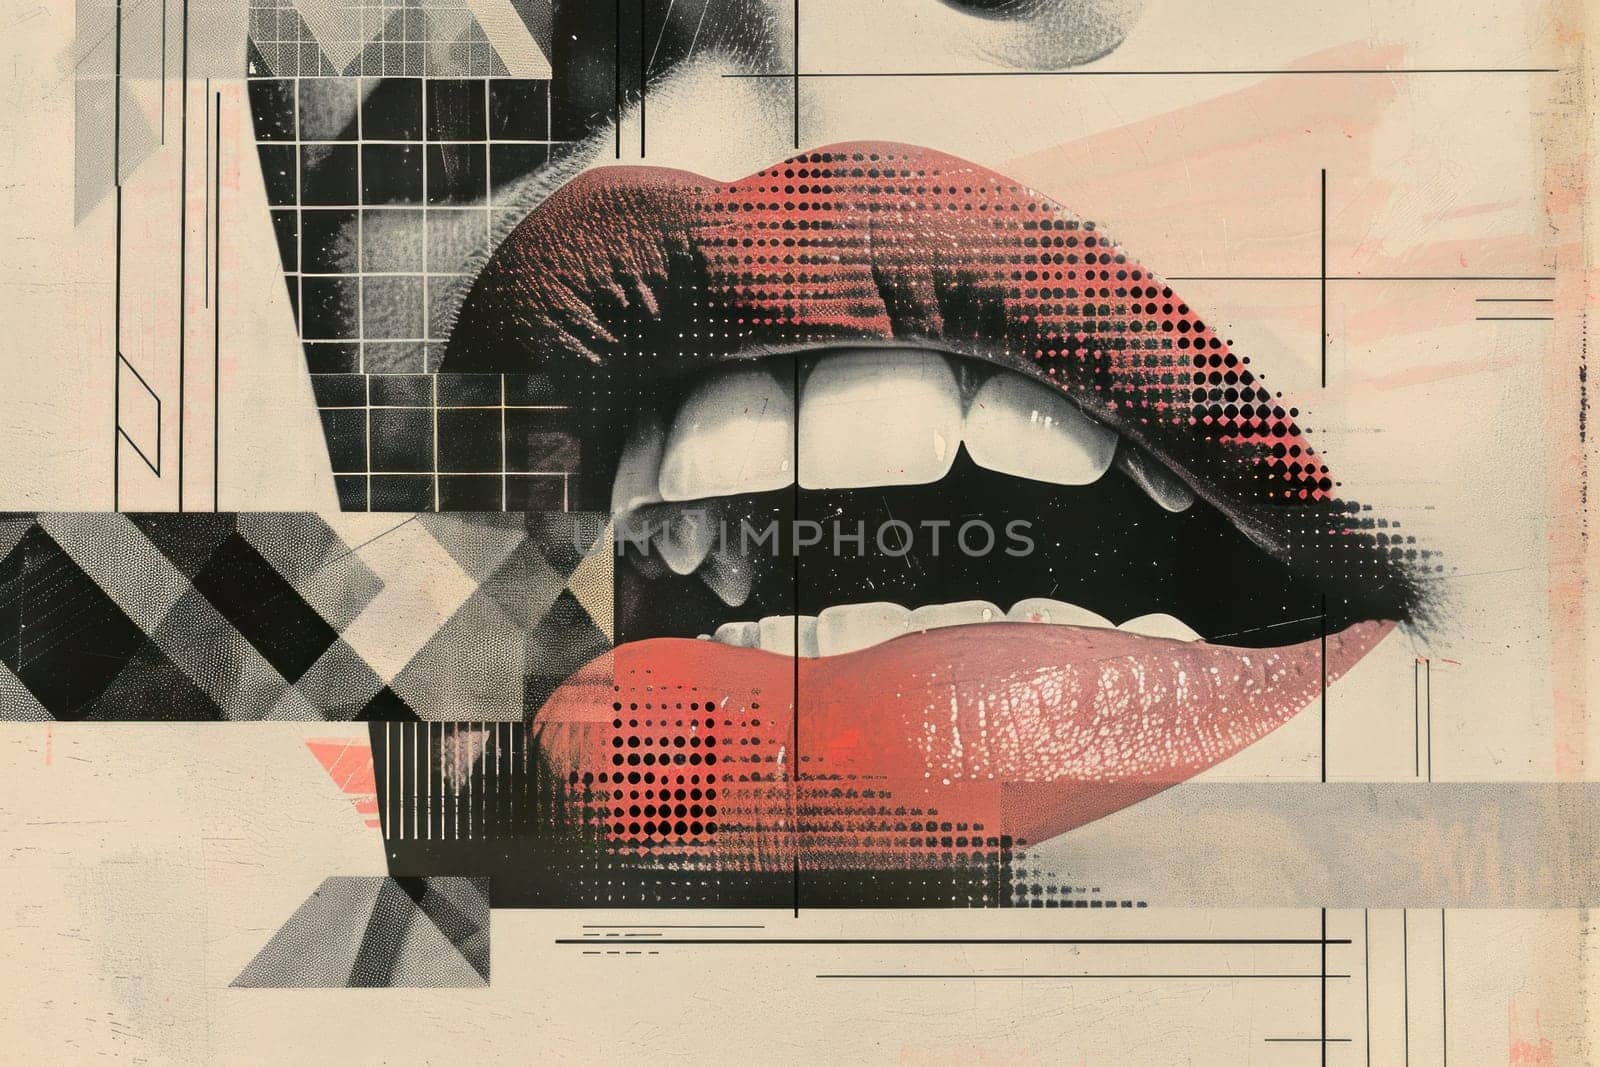 Beauty and artistic geometric shapes surrounding woman's luscious lips on poster for fashion event by Vichizh